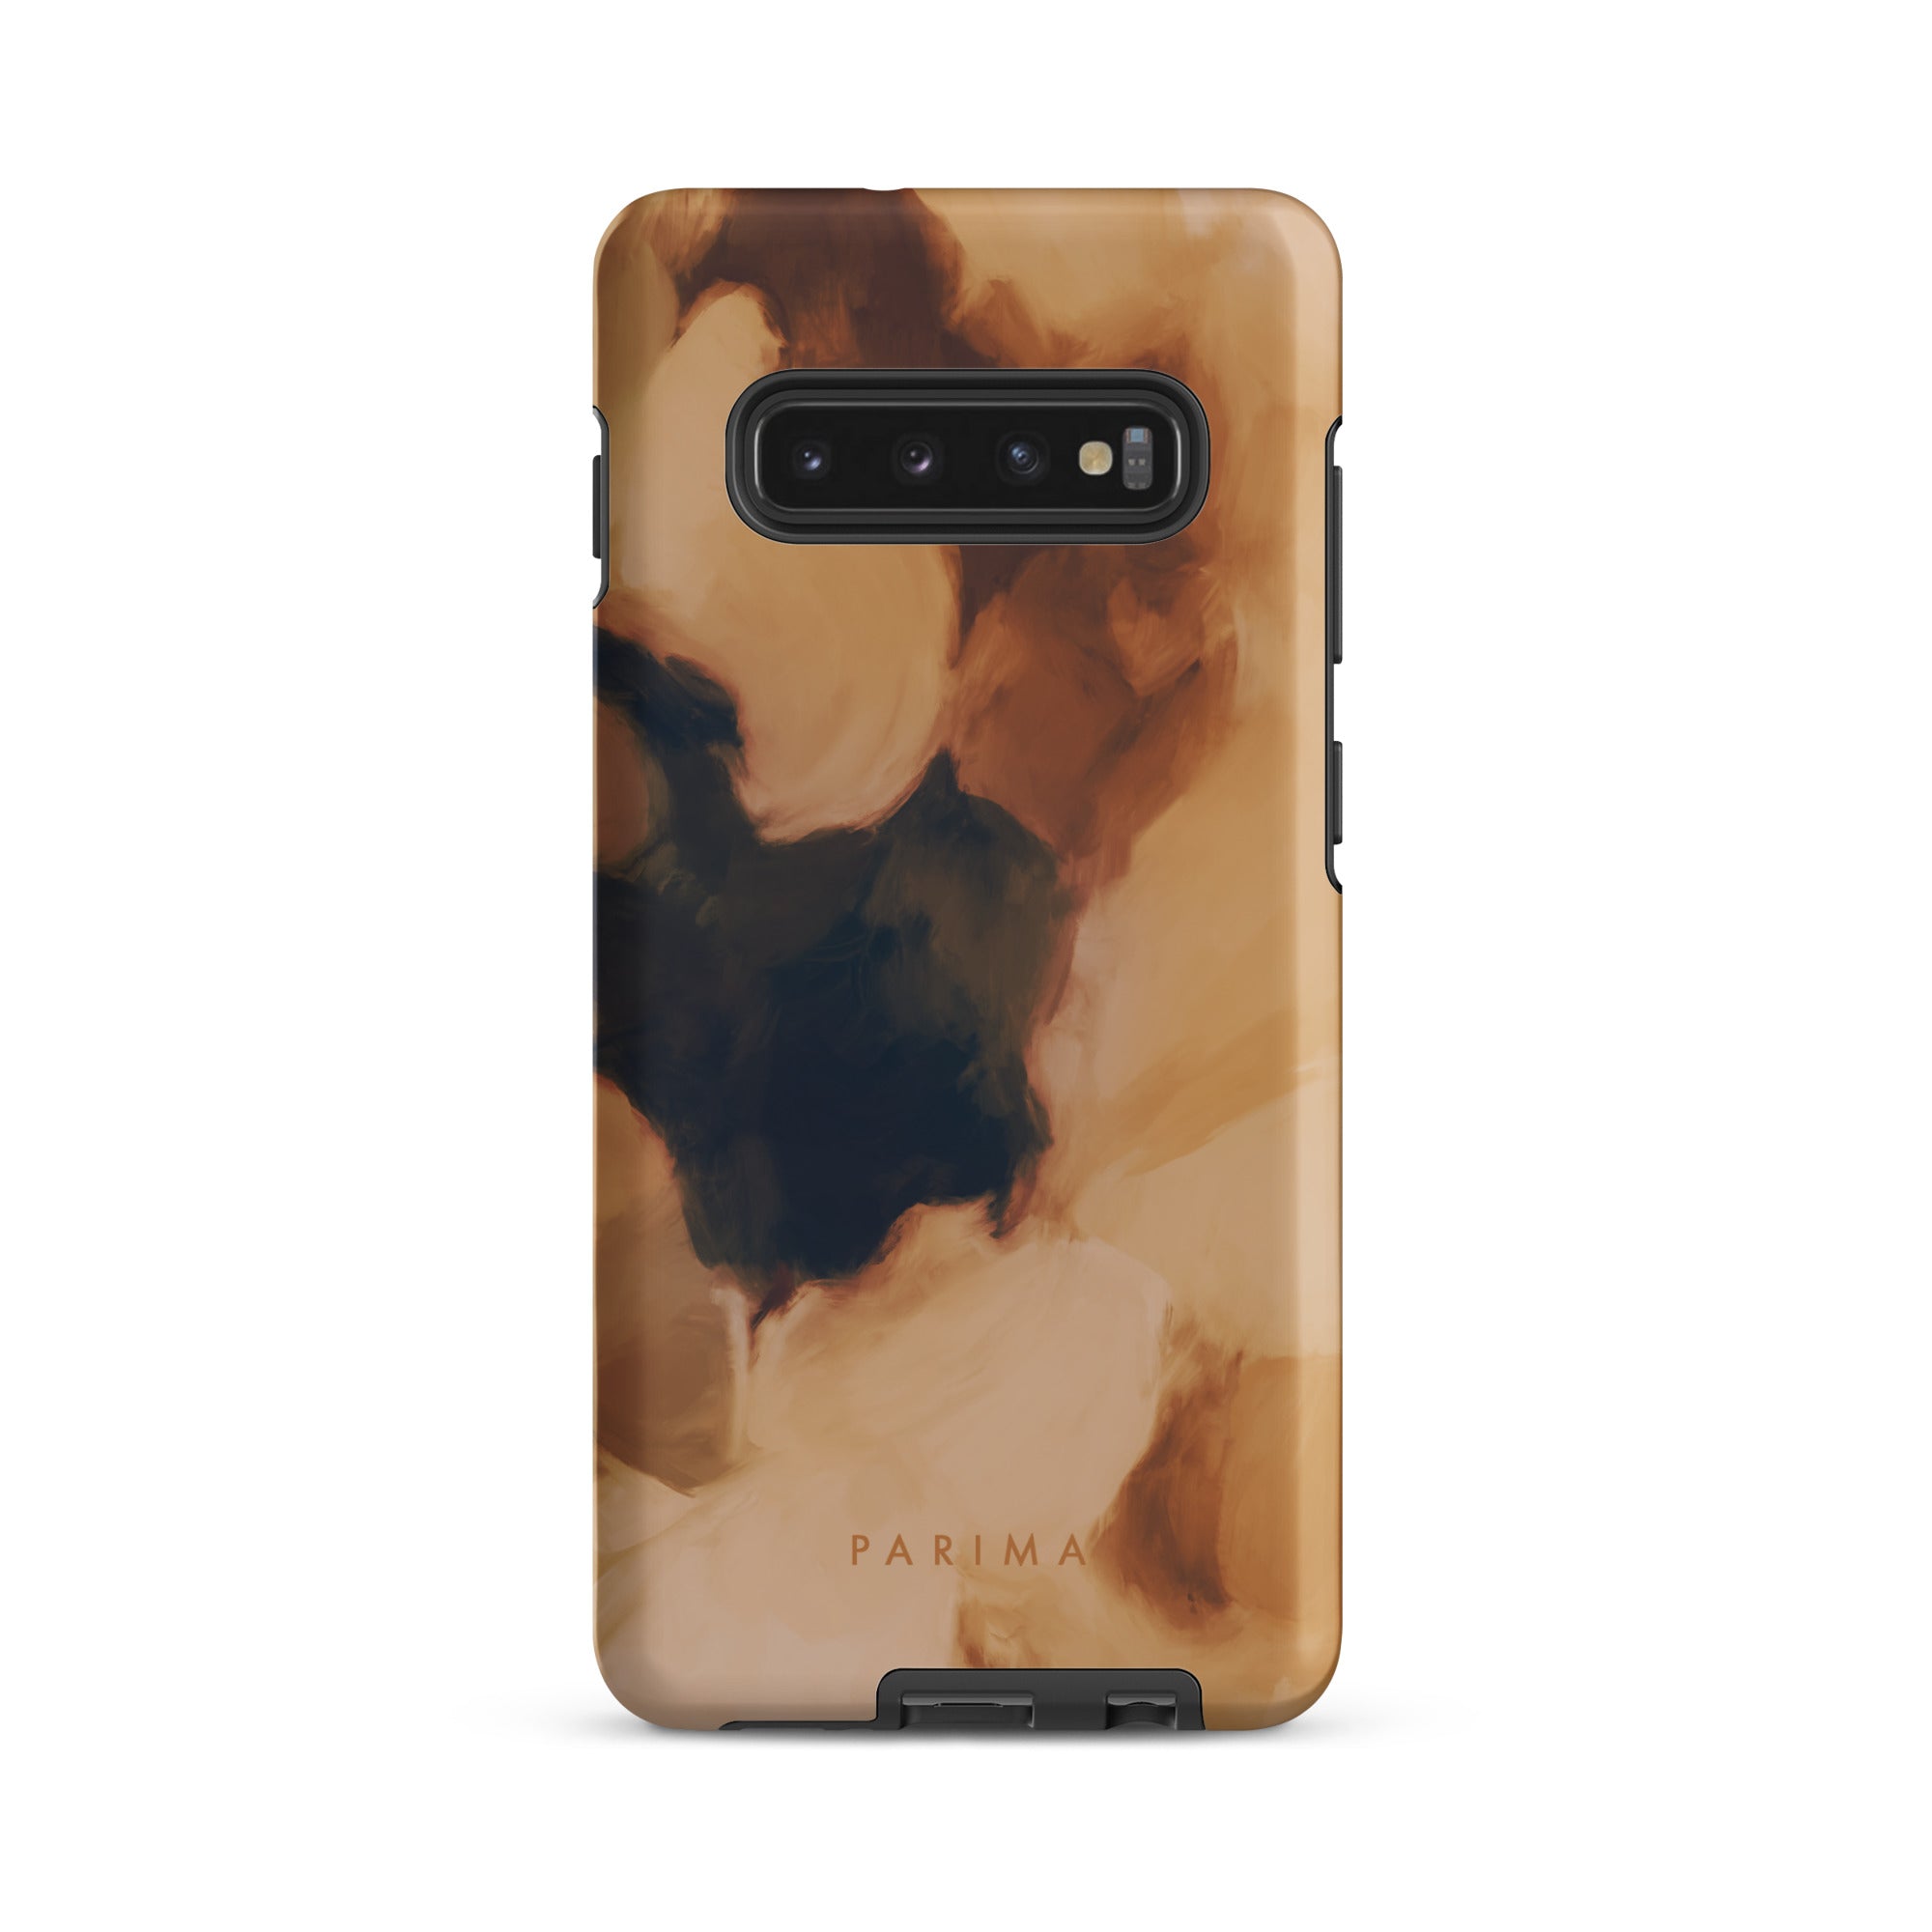 Clay, brown and tan color abstract art on Samsung Galaxy s10 Plus tough case by Parima Studio